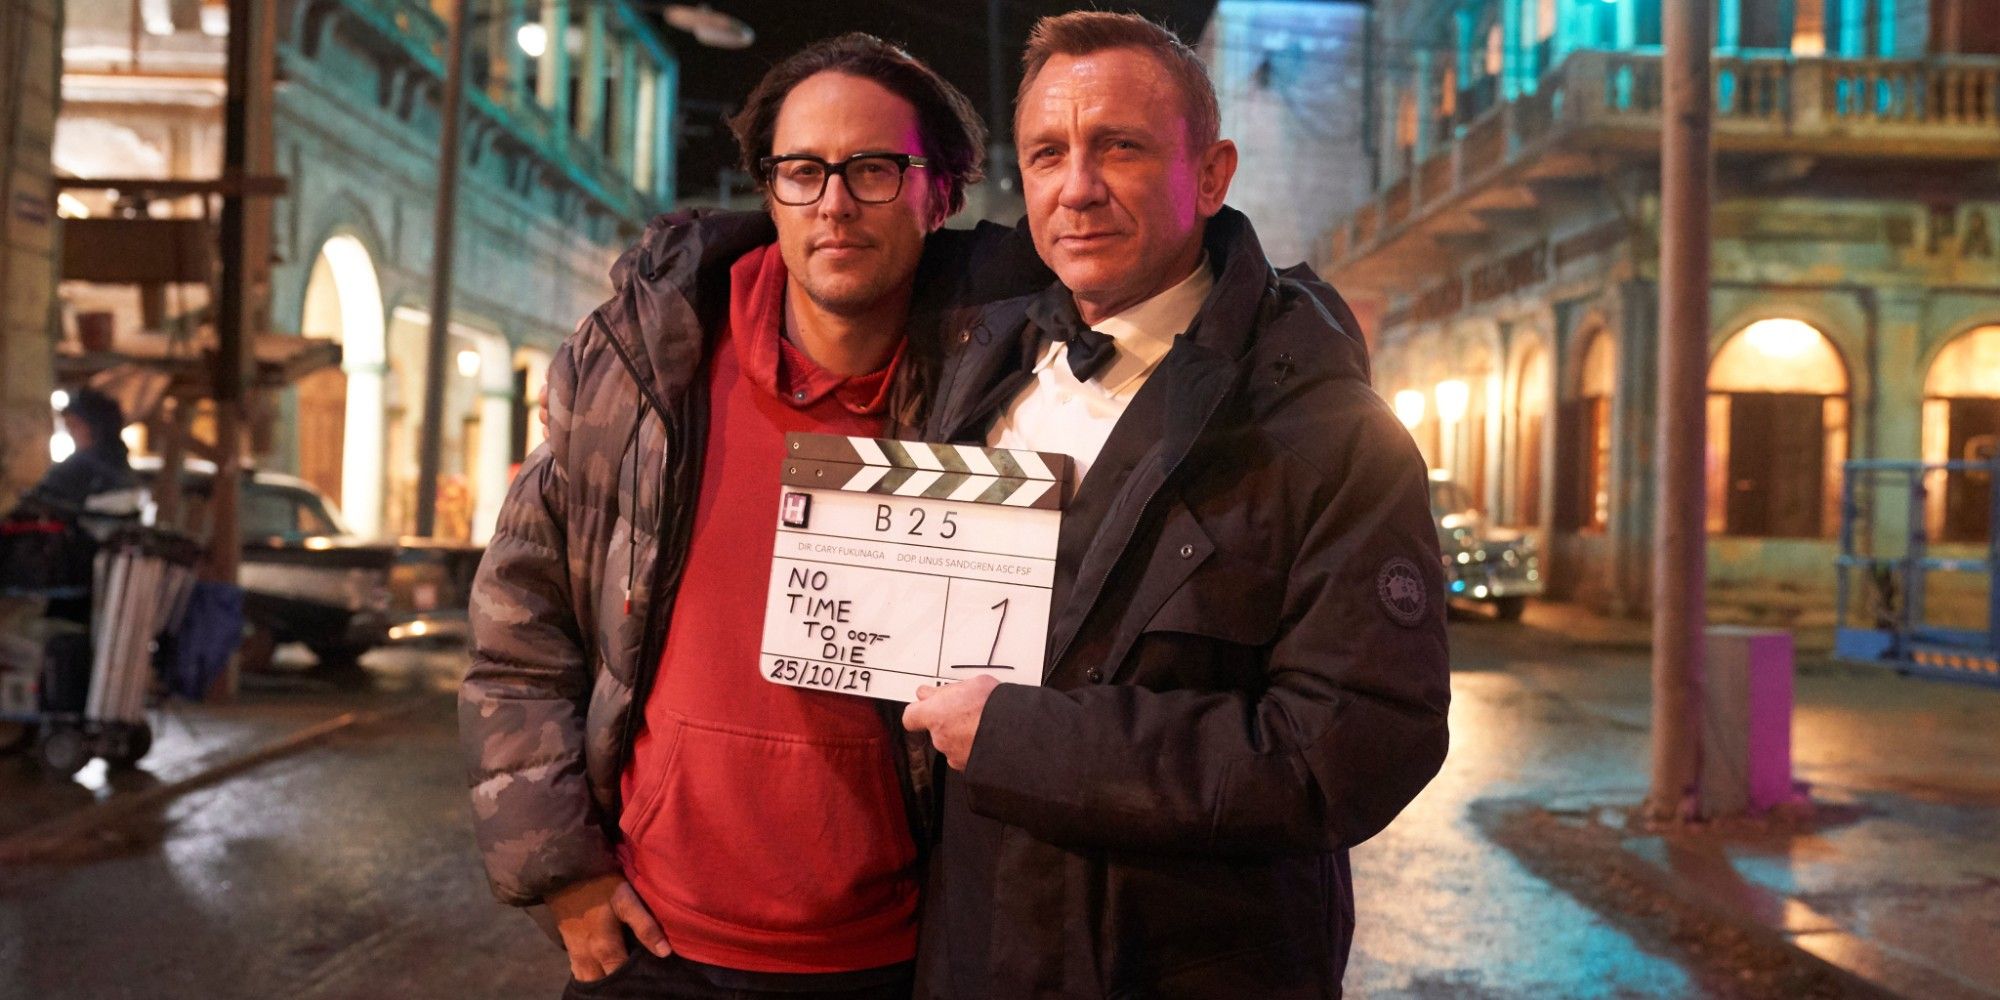 Cary Fukunaga and Daniel Craig on the No Time to Die set